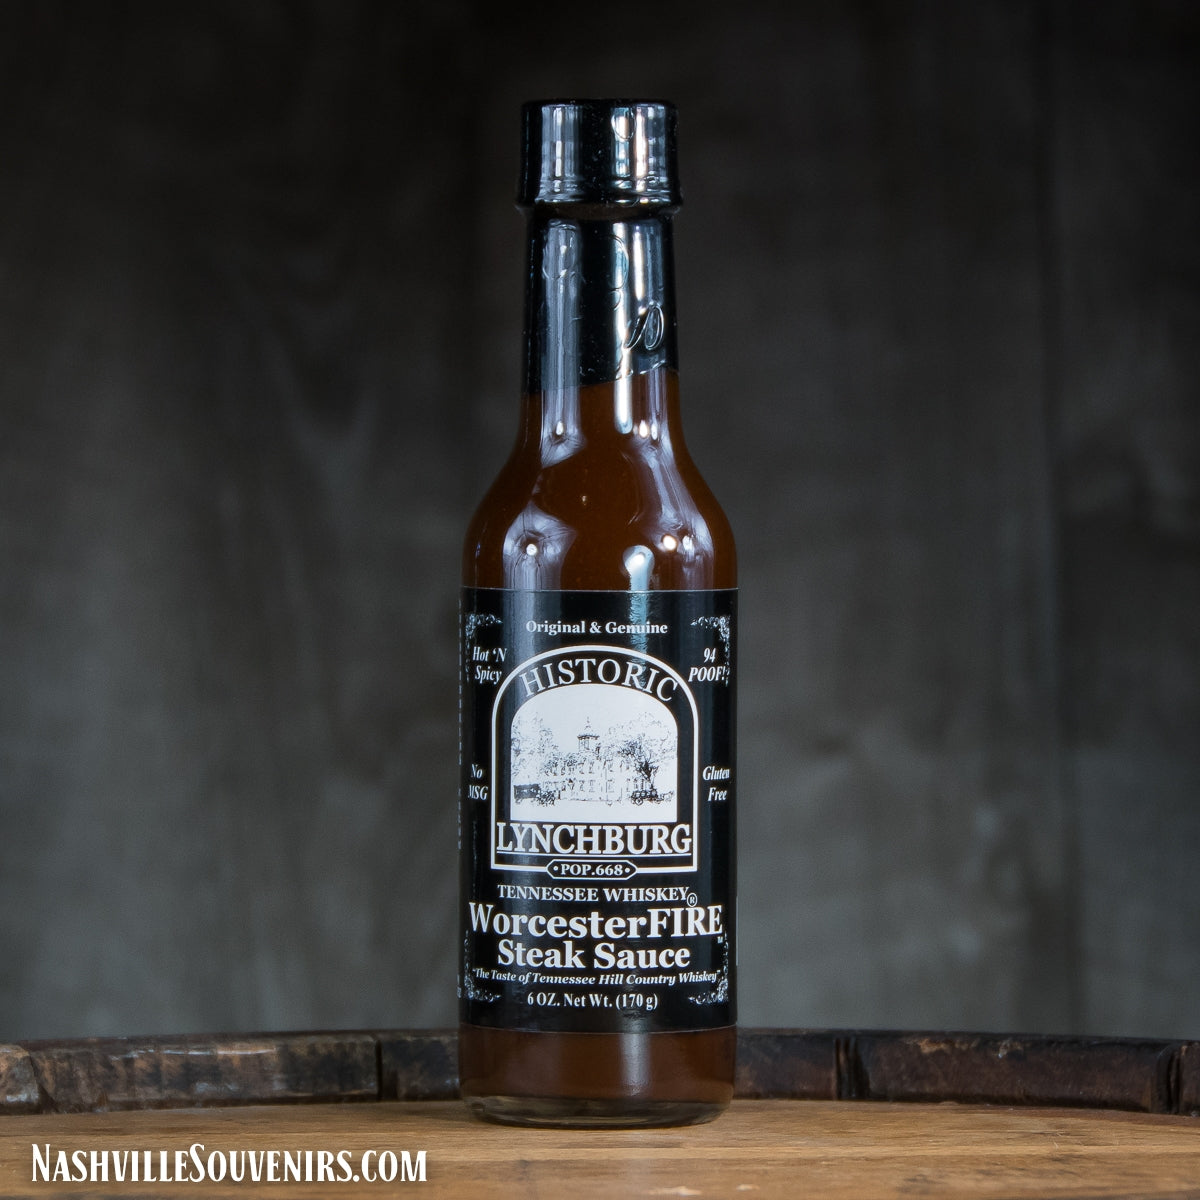 Historic Lynchburg WorcesterFIRE Steak Sauce will make you throw your steak away if you don't have this sauce! FREE SHIPPING on all US orders over $75!